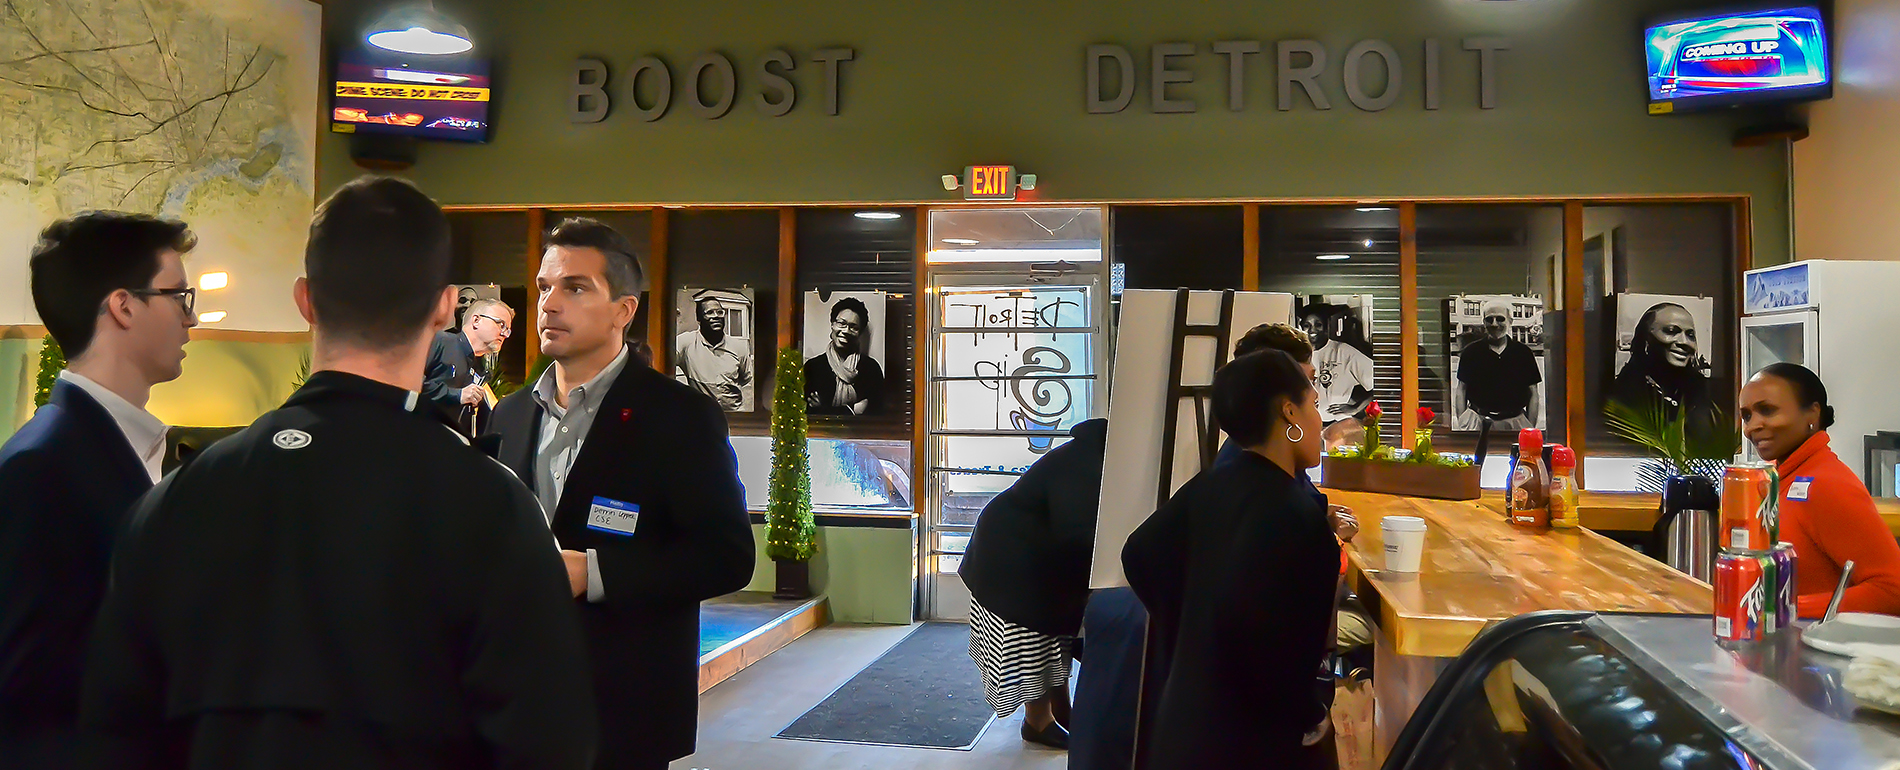 Eight people stand and mingle inside of Boost Detroit with photos, television screens and a countertop pictured in the photo. The words DETROIT BOOST are displayed on the wall.